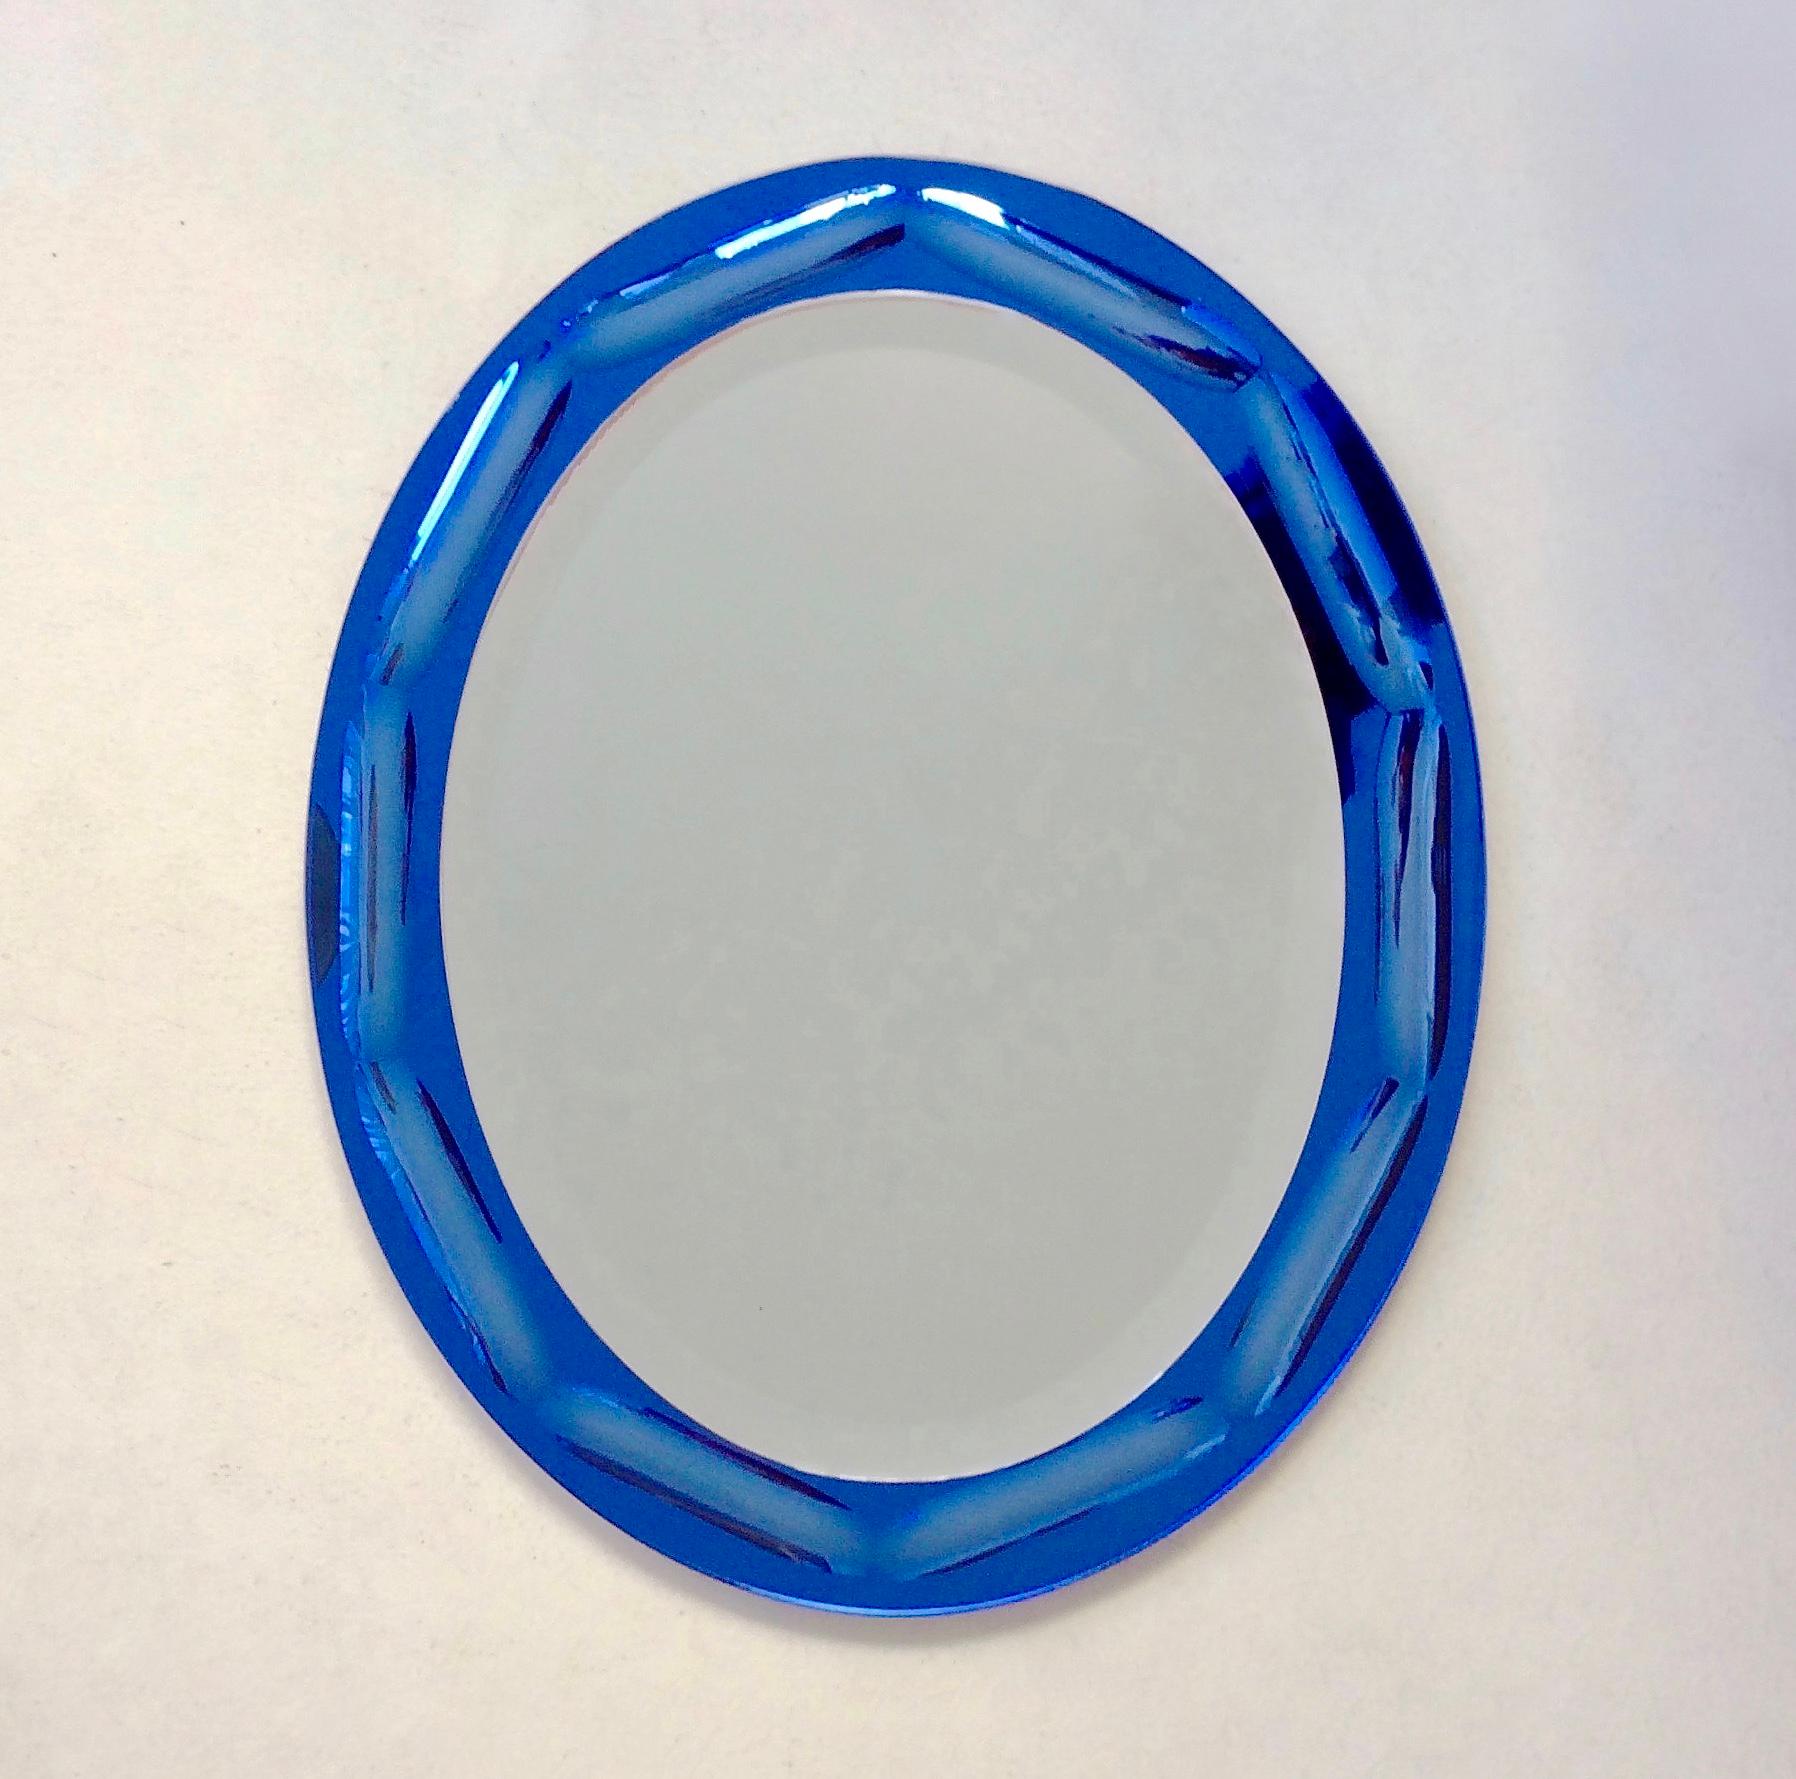 Nice Antonio Lupi oval mirror, circa 1960, Italy.
Cobalt blue mirrored glass frame with oval shapes drawn in hollow.
Dimensions: 77 cm H, 63 cm W, 3 cm D.
Good original condition, with is original Lupi paper label.
All purchases are covered by